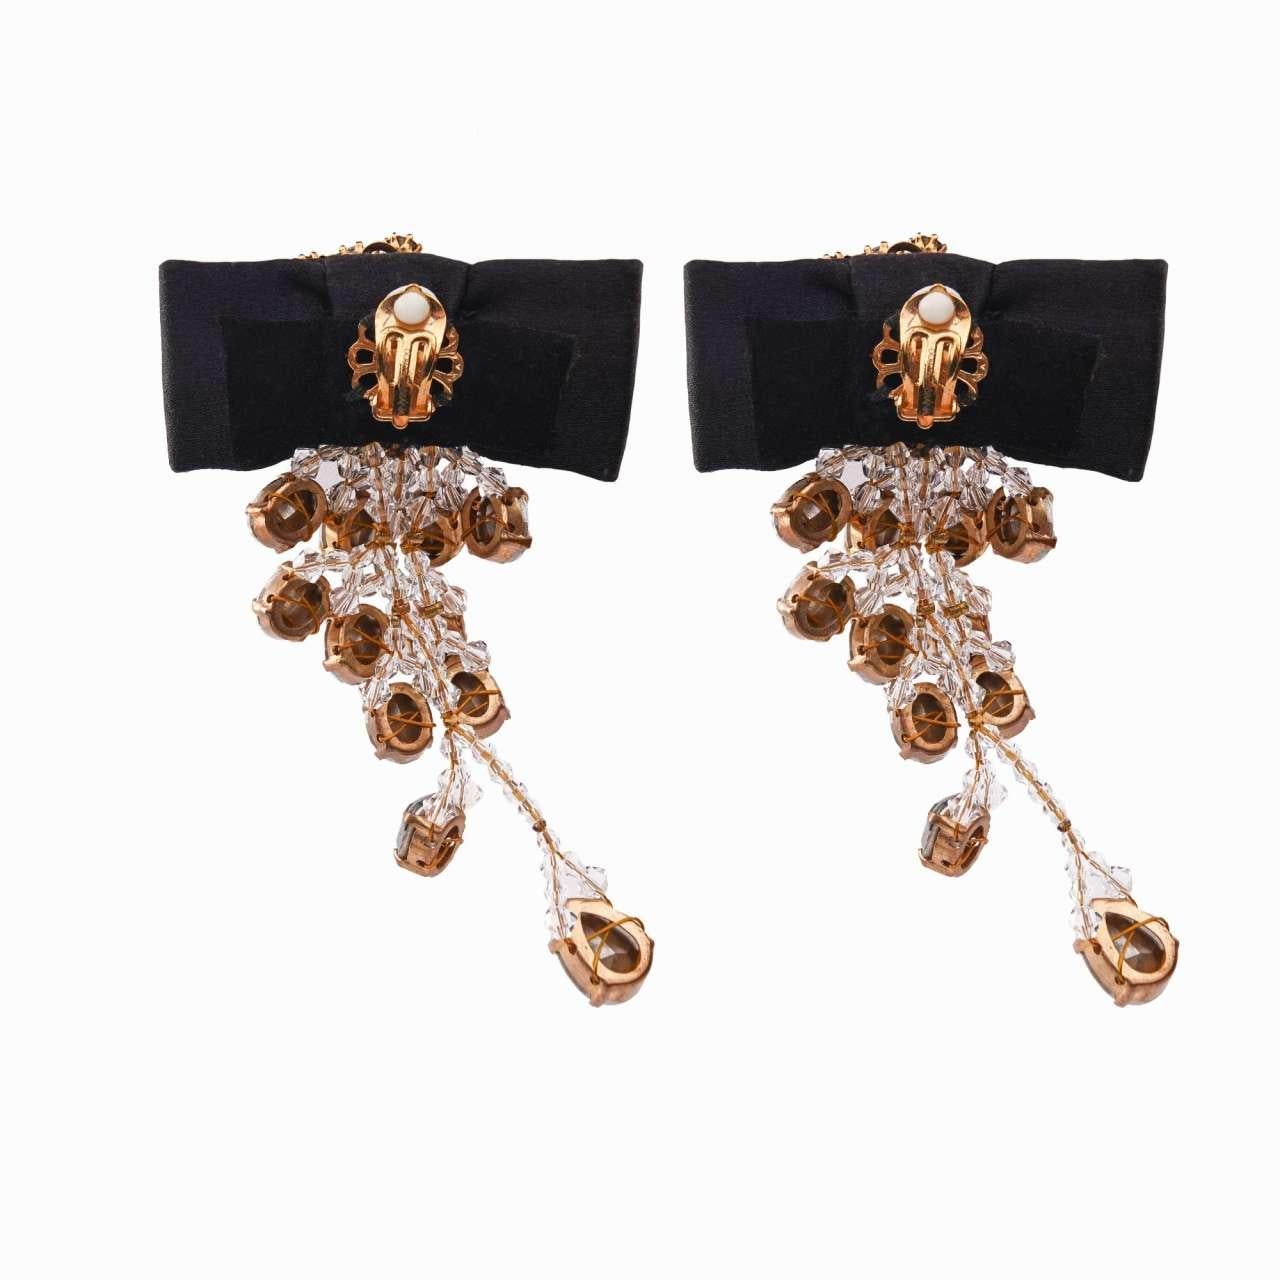 - Chandelier Clip Earrings adorned with silk bows, filigree elements and crystals in black and gold by DOLCE & GABBANA - RUNWAY - Dolce & Gabbana Fashion Show - New with Tag - Made in Italy - Gold-plated brass - Clip fastening - Nickel free - Model: